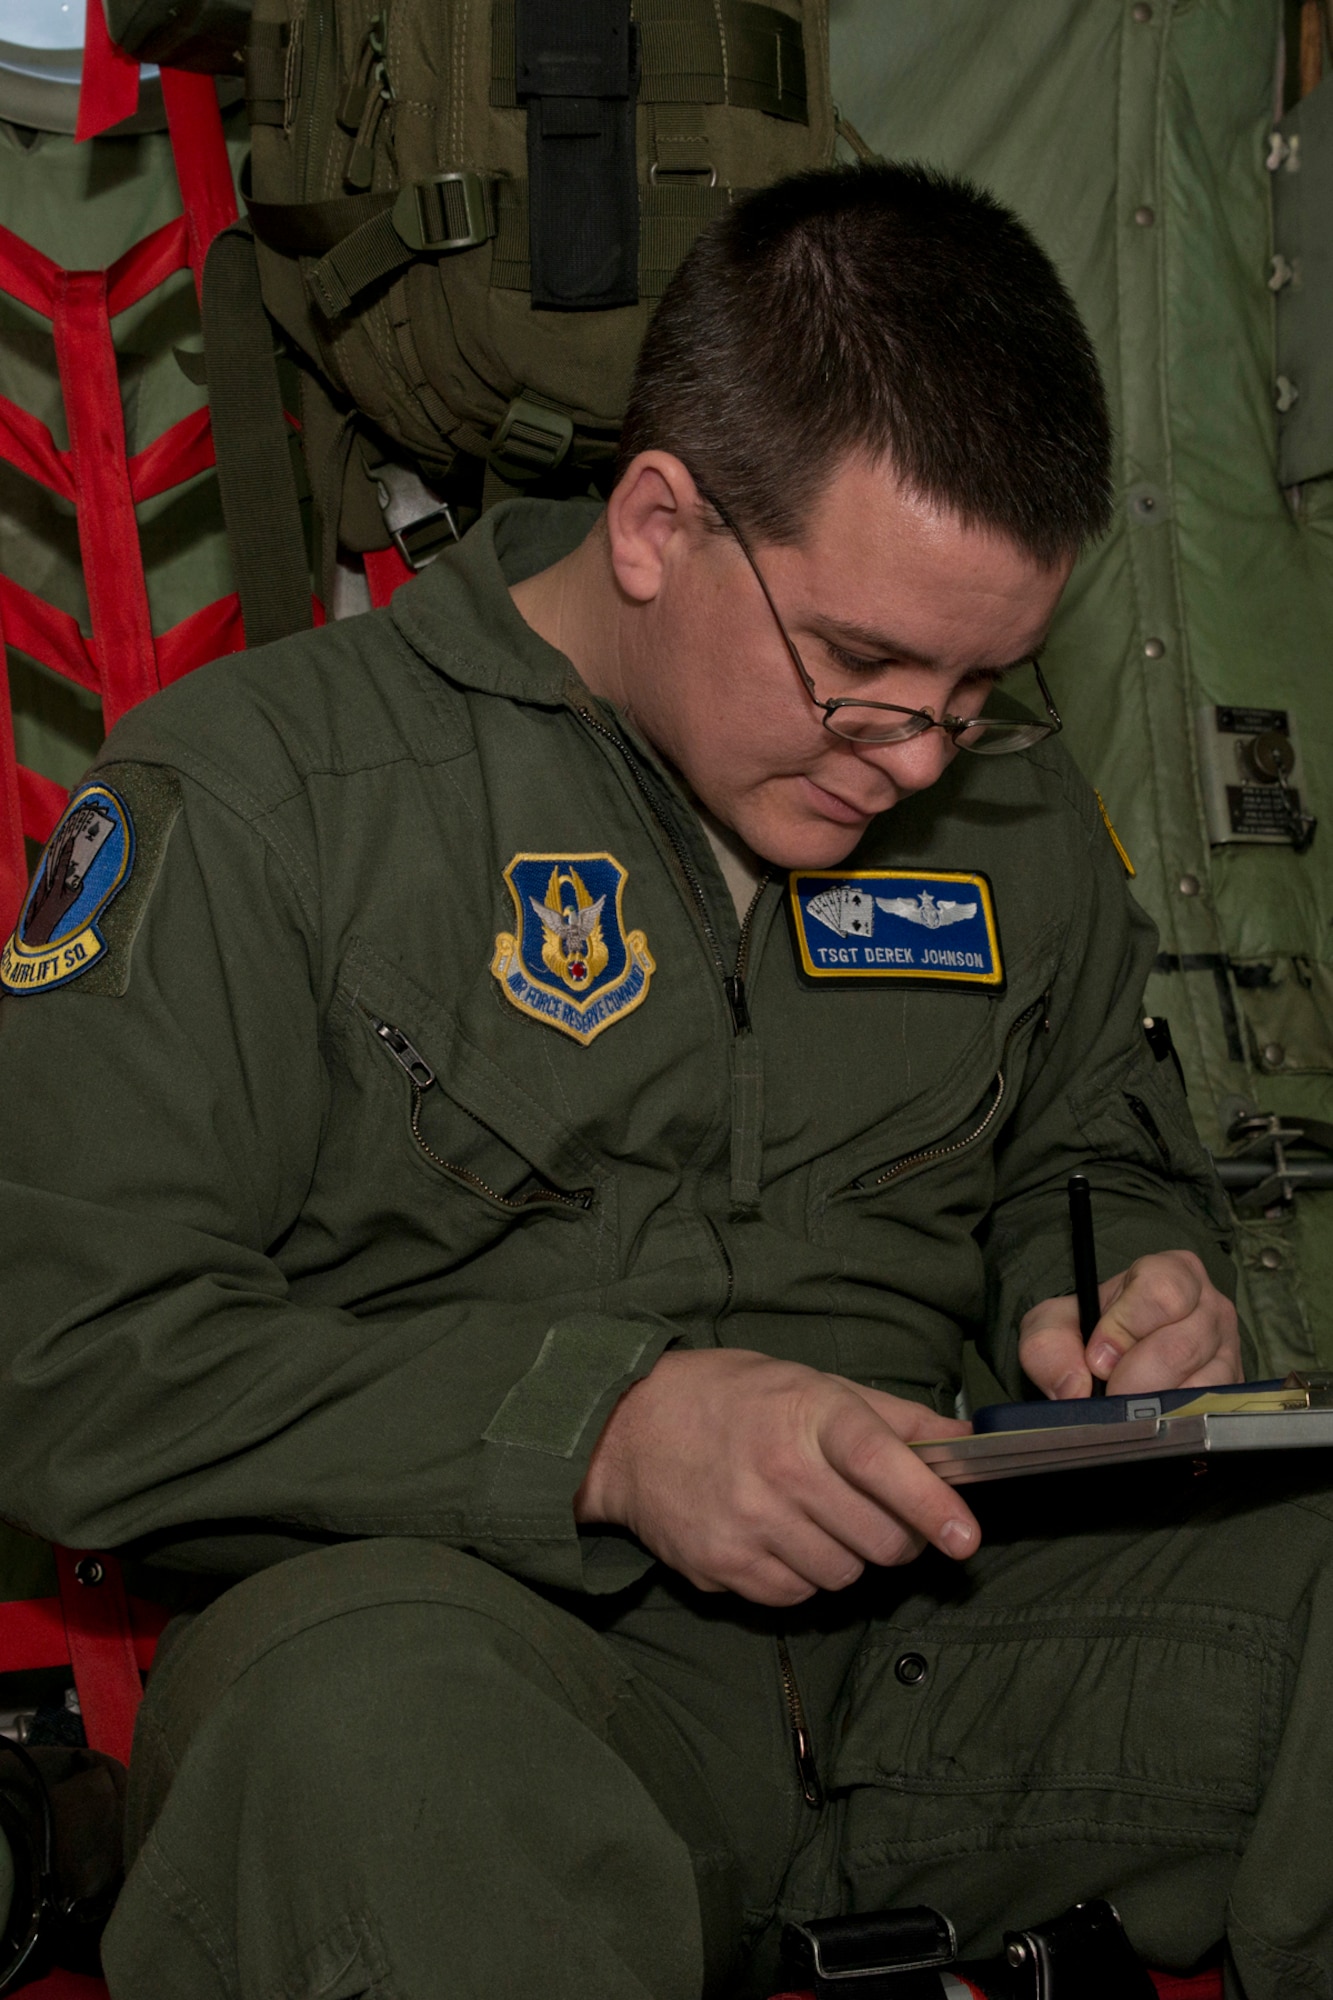 U.S. Air Force Reserve Tech. Sgt. Derek Johnson, a loadmaster assigned to the 327th Airlift Squadron, calculates the weight and balance of the C-130H before its final training mission flight at Little Rock Air Force Base, Ark., Jan. 28, 2016. The flight marks the official change of mission from the “H” model to the “J” model for the 913th Airlift Group. (U.S. Air Force photo by Master Sgt. Jeff Walston/Released)